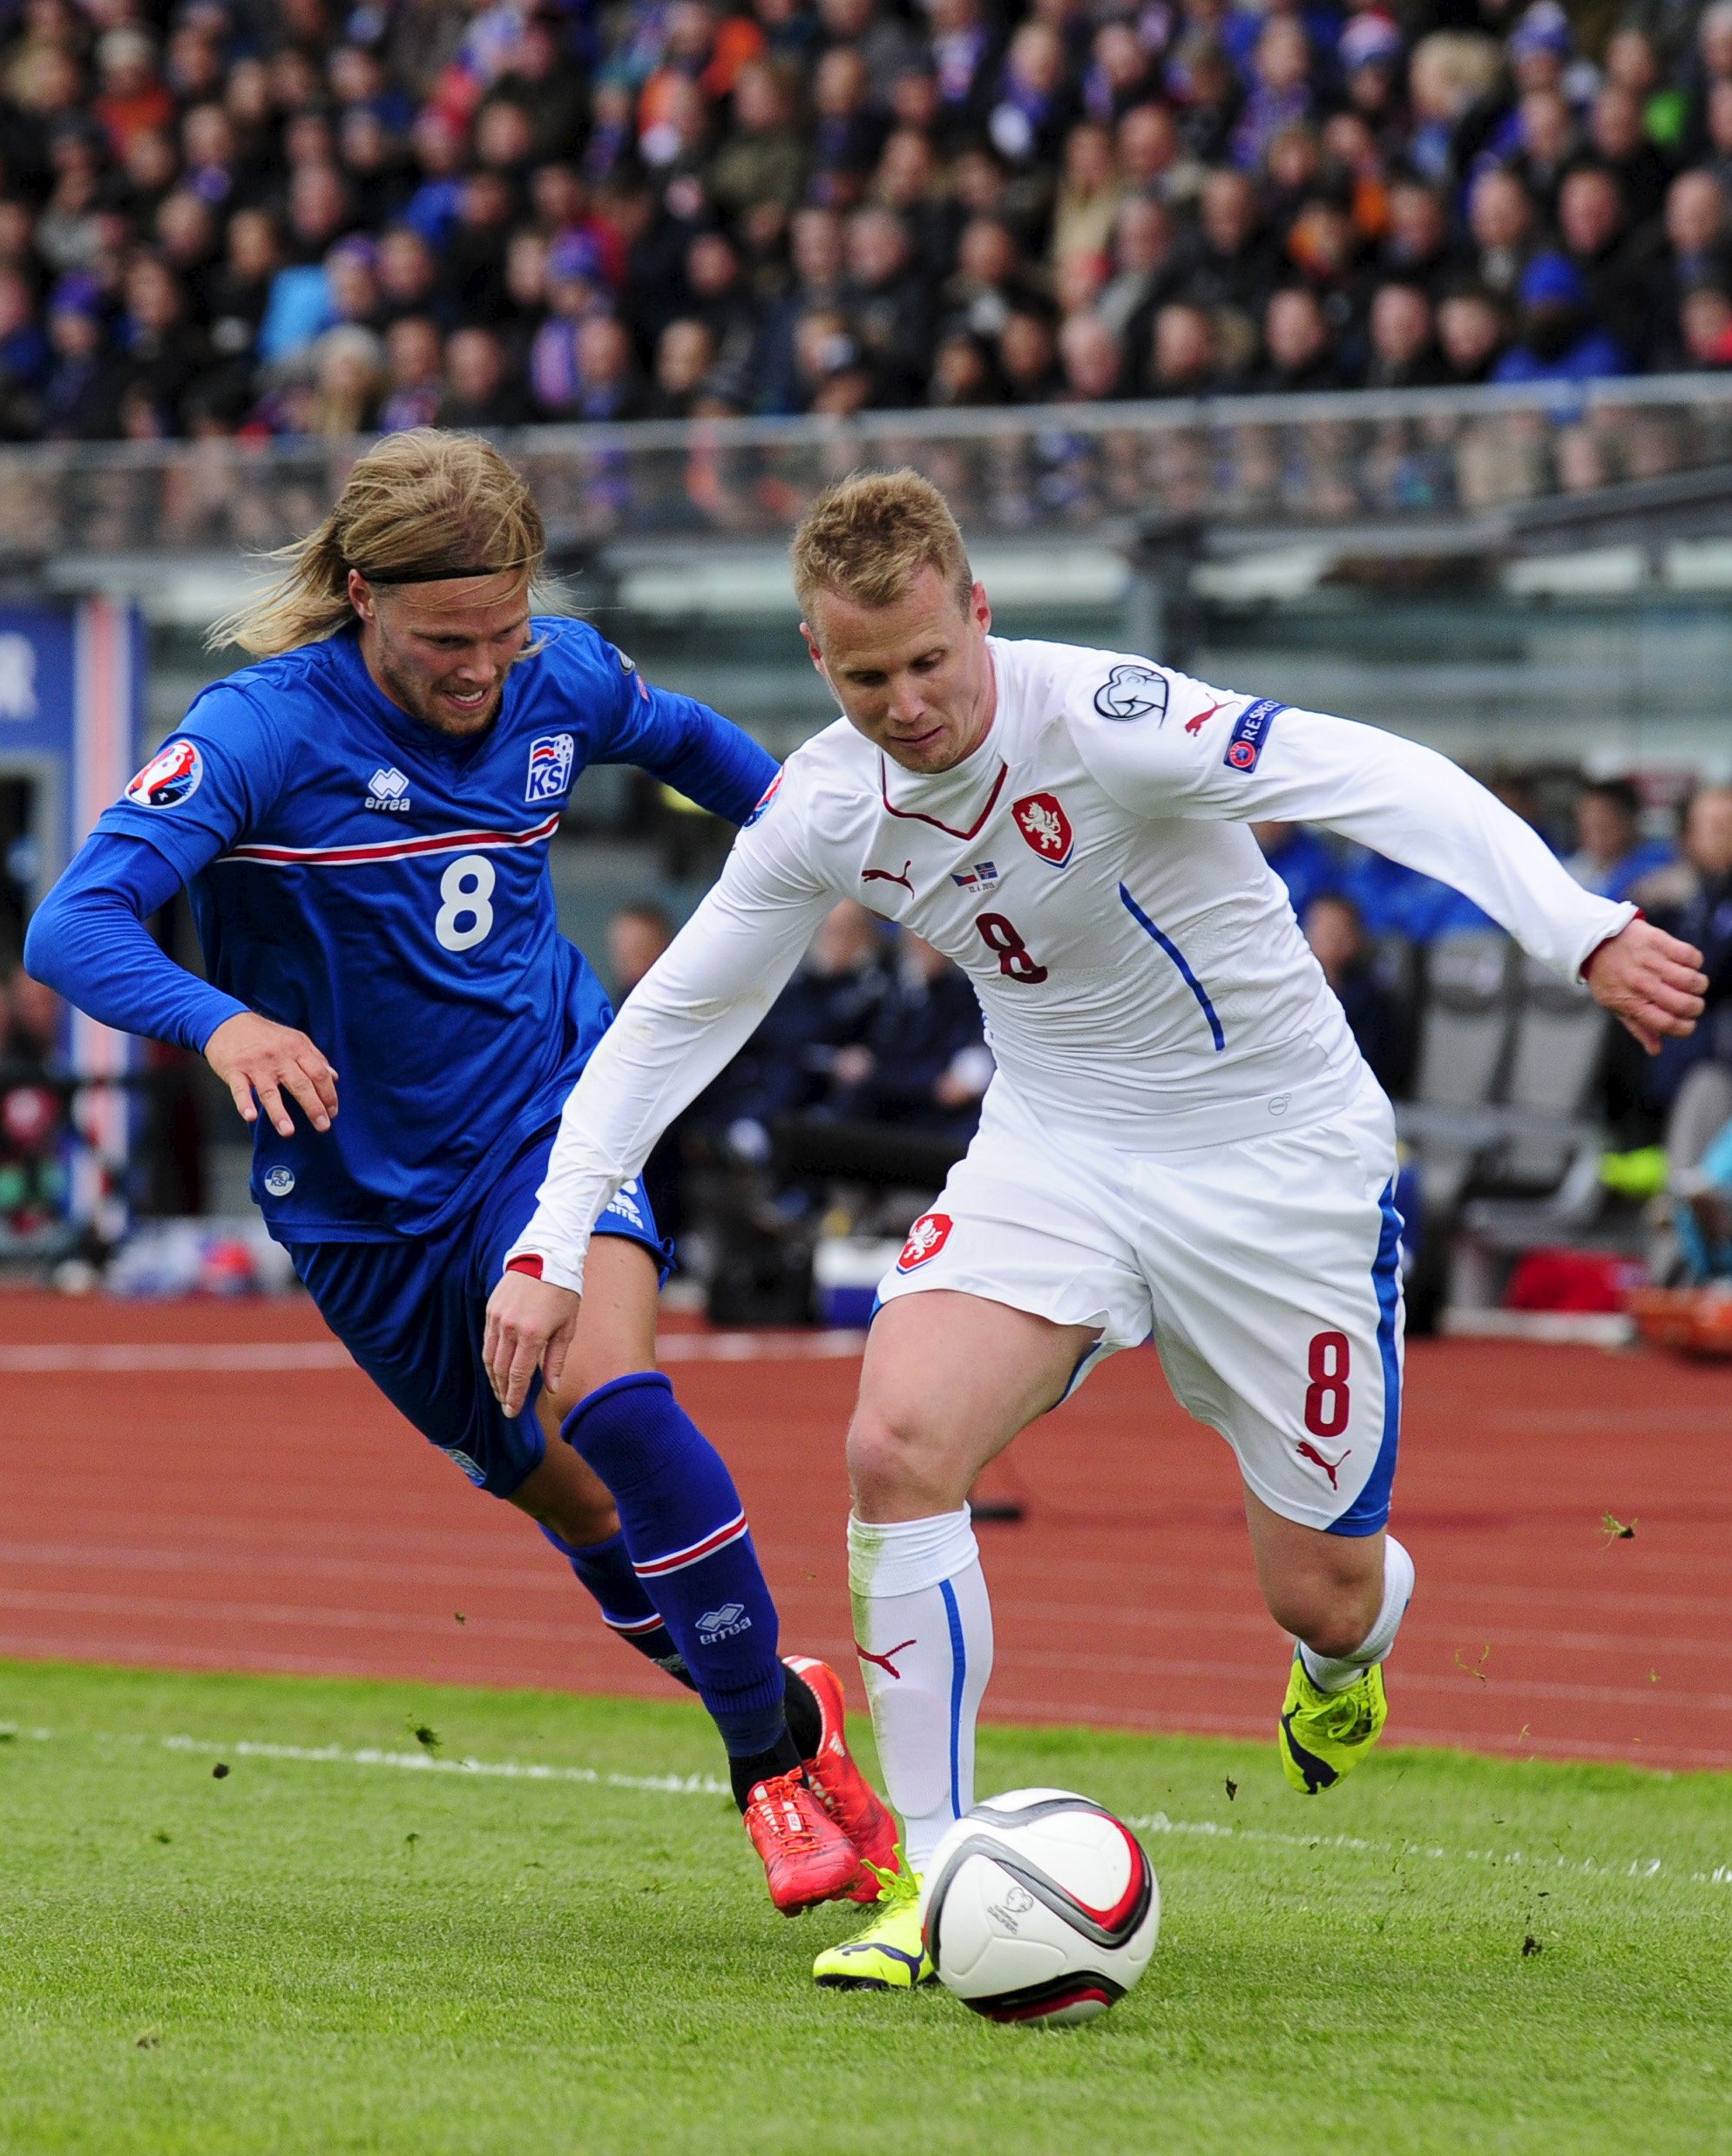 Iceland's Birkir Bjarnason (L) fights for the ball with Czech Republic's David Limbersky during their Euro 2016 qualifying soccer match in Reykjavik, Iceland, June 12, 2015. REUTERS/Sigtryggur Johannsson